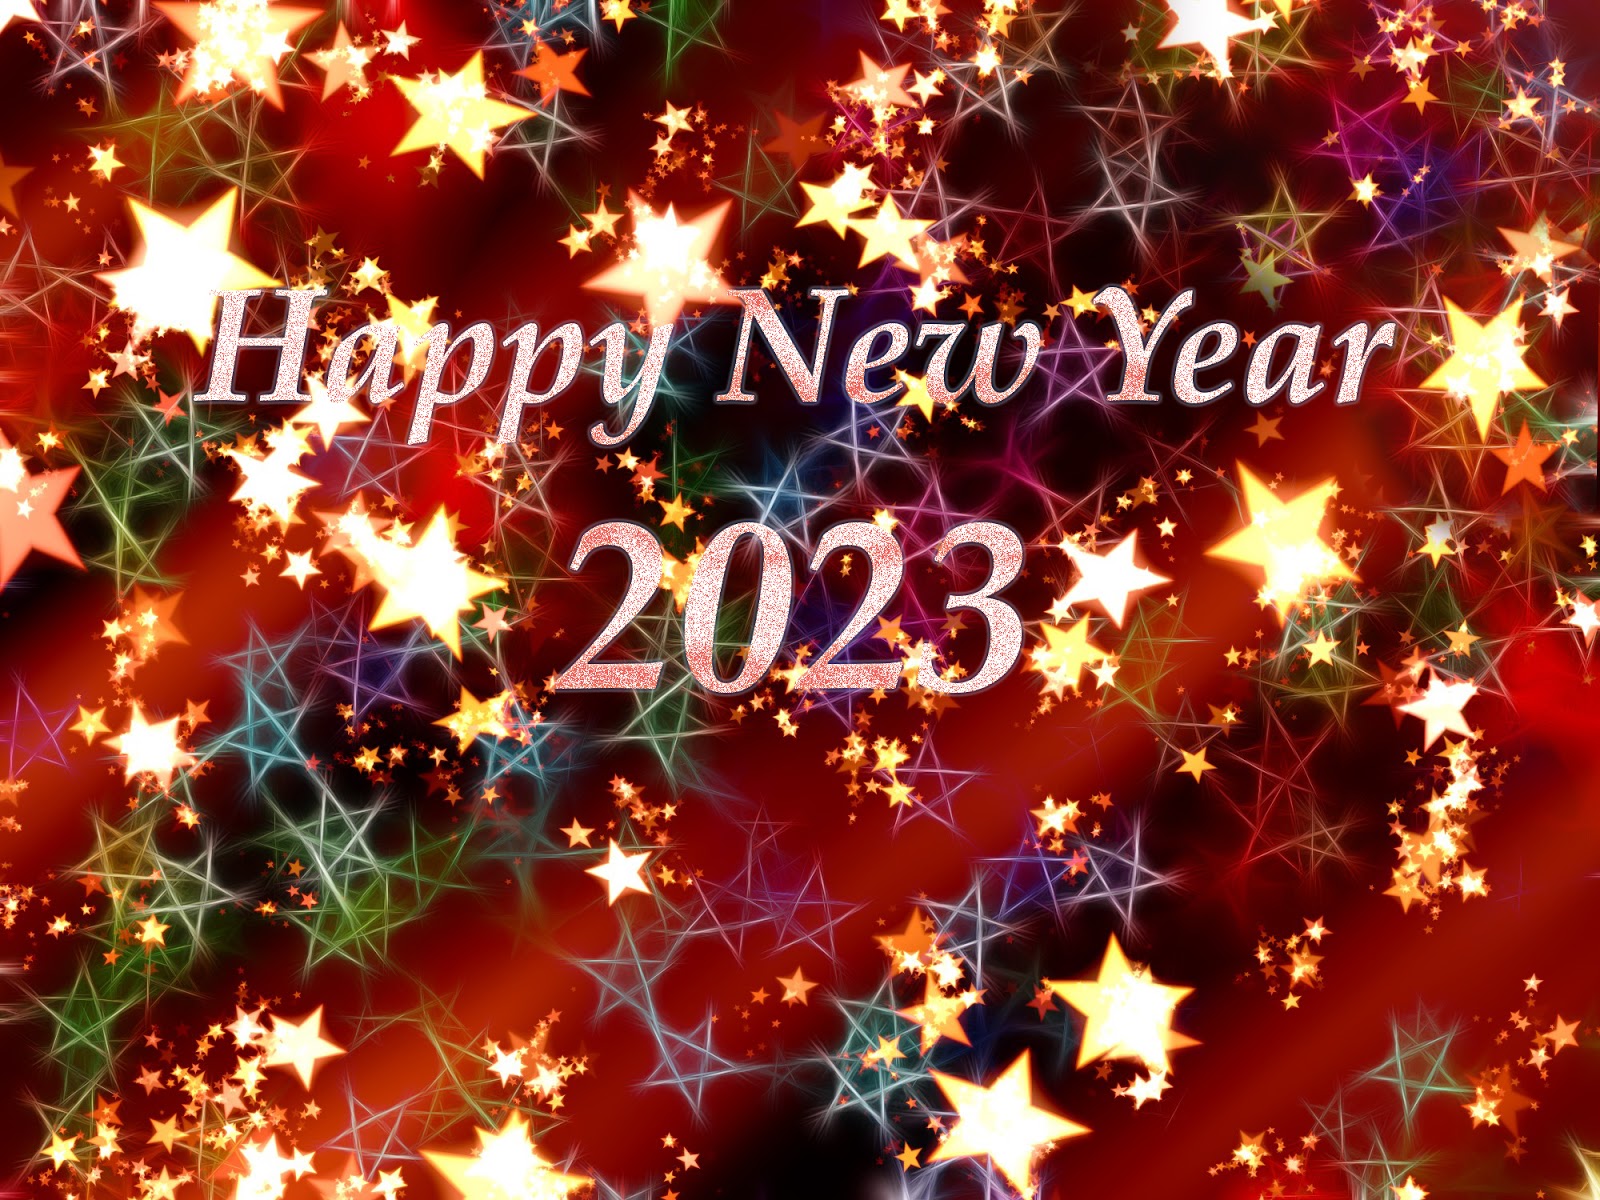 Happy New Year 2023 HD Images, New Year Wallpaper FestiFit